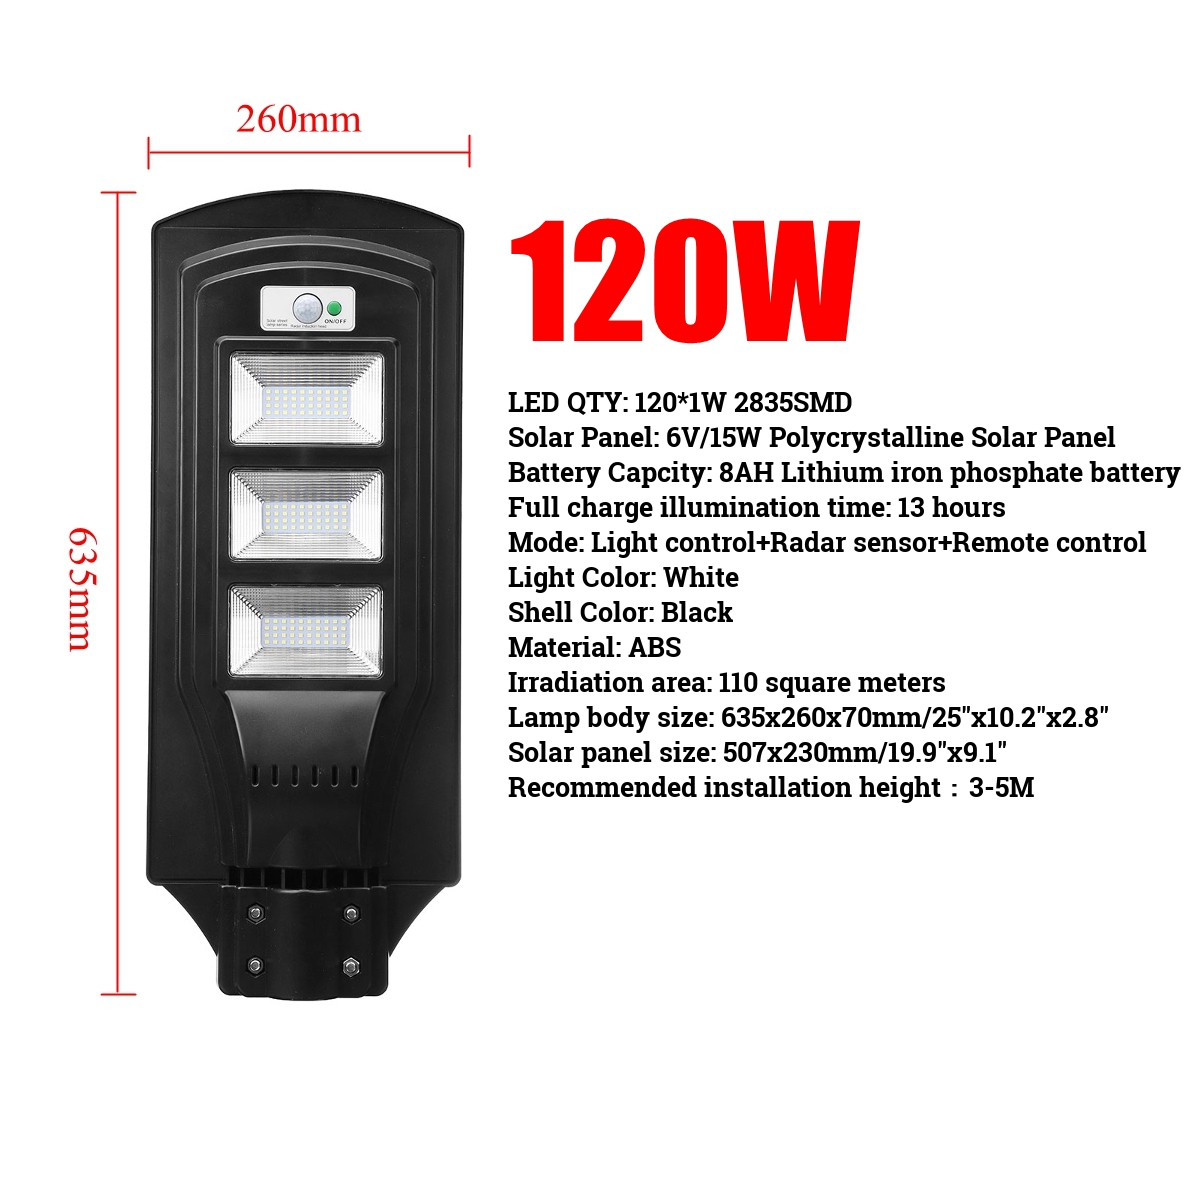 Find 3000W LED Solar Street Light Flood Light Motion Sensor Remote Outdoor Garden for Sale on Gipsybee.com with cryptocurrencies